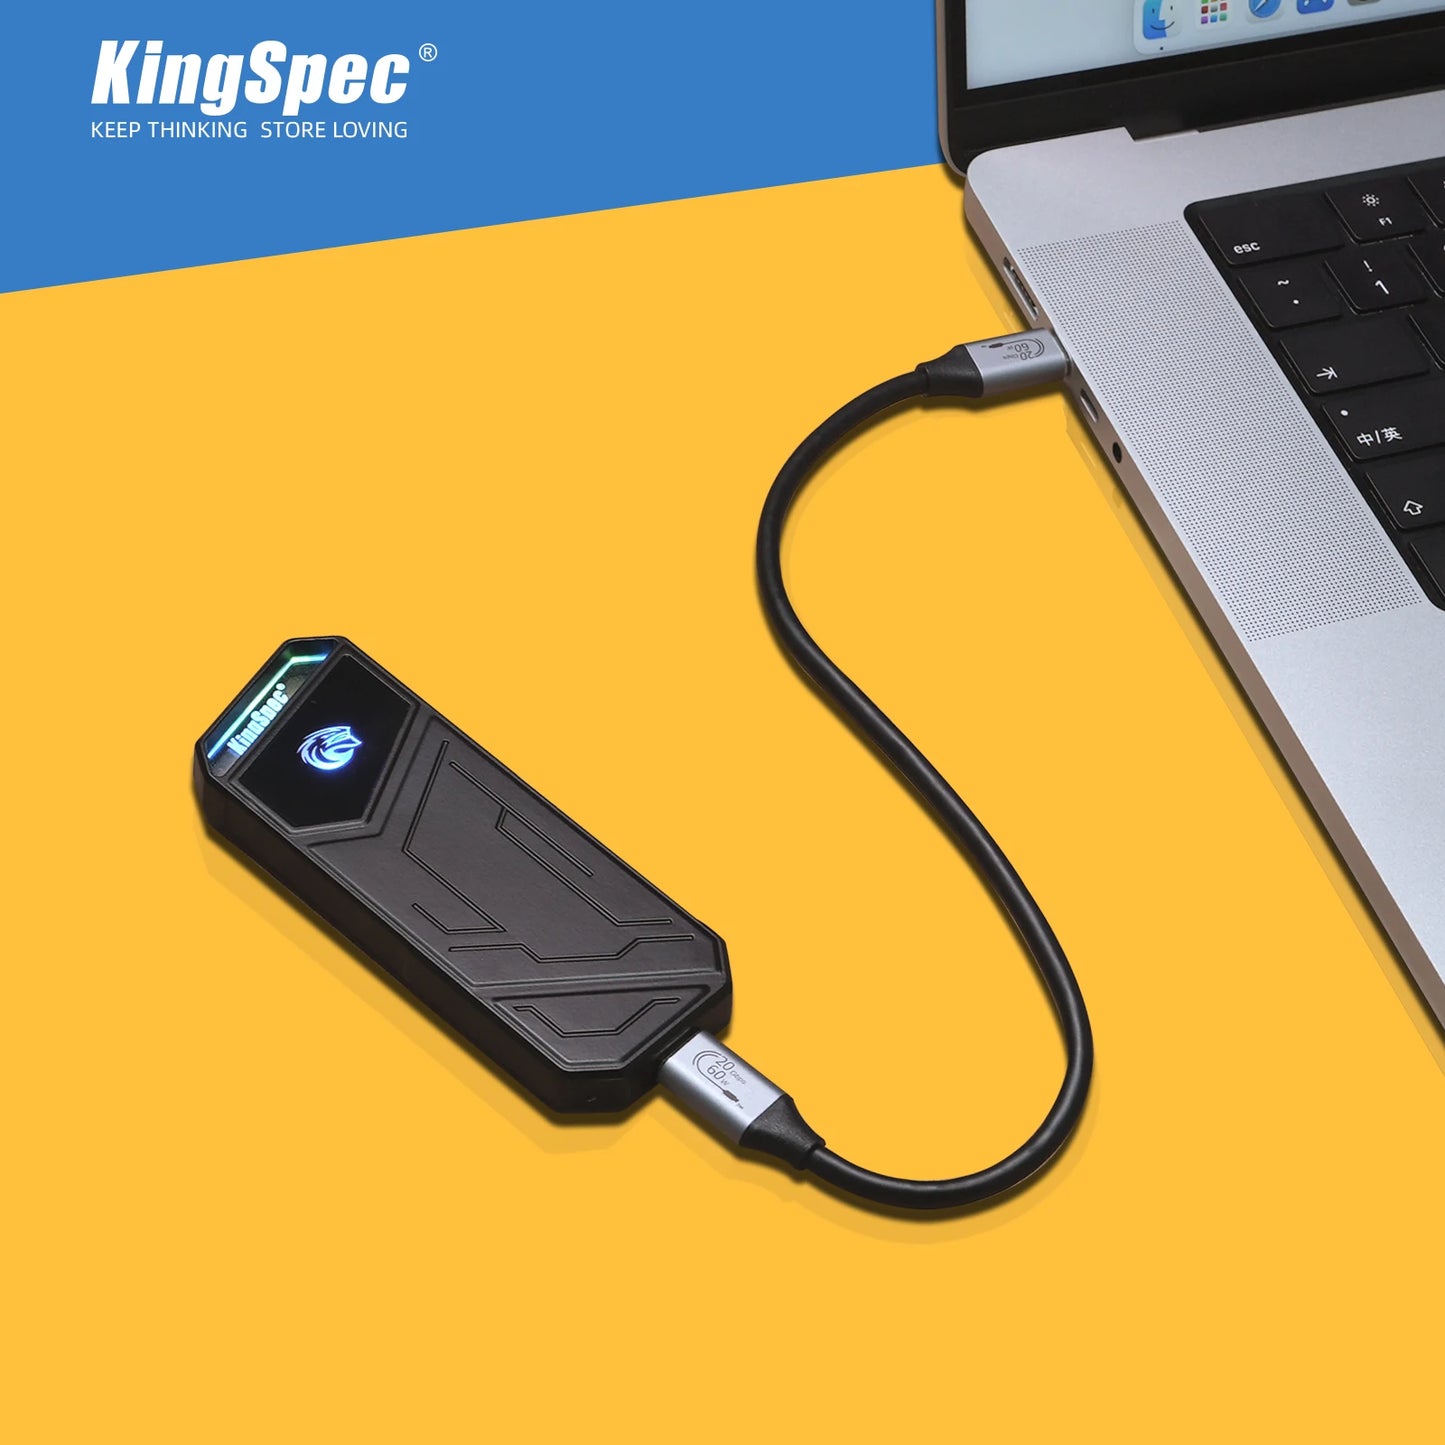 KingSpec Portable Solid State Drive (NVMe)